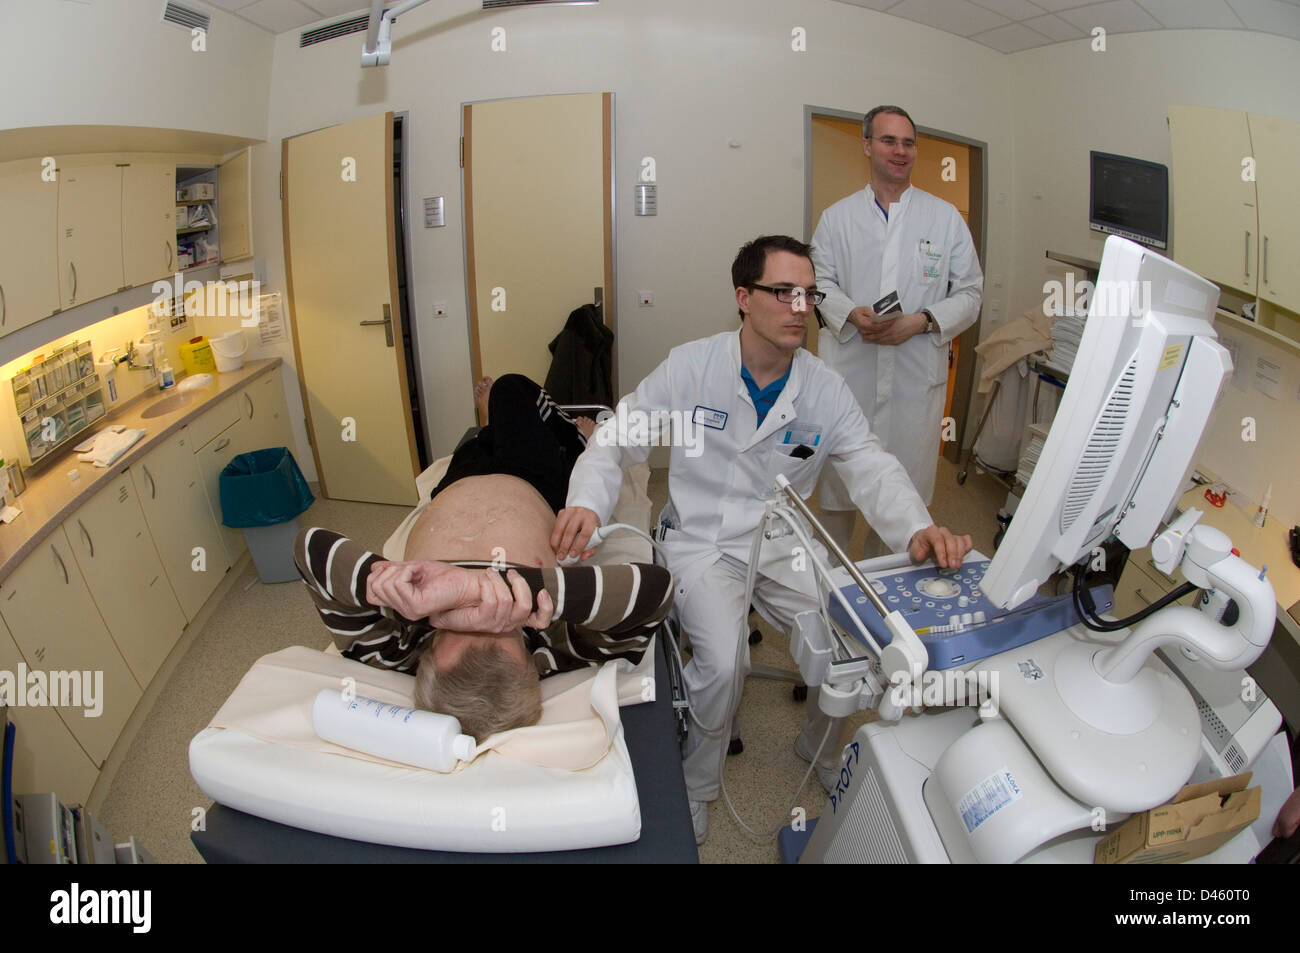 A man undergoing an endoscopic procedure to detect a suspected hernia. Stock Photo